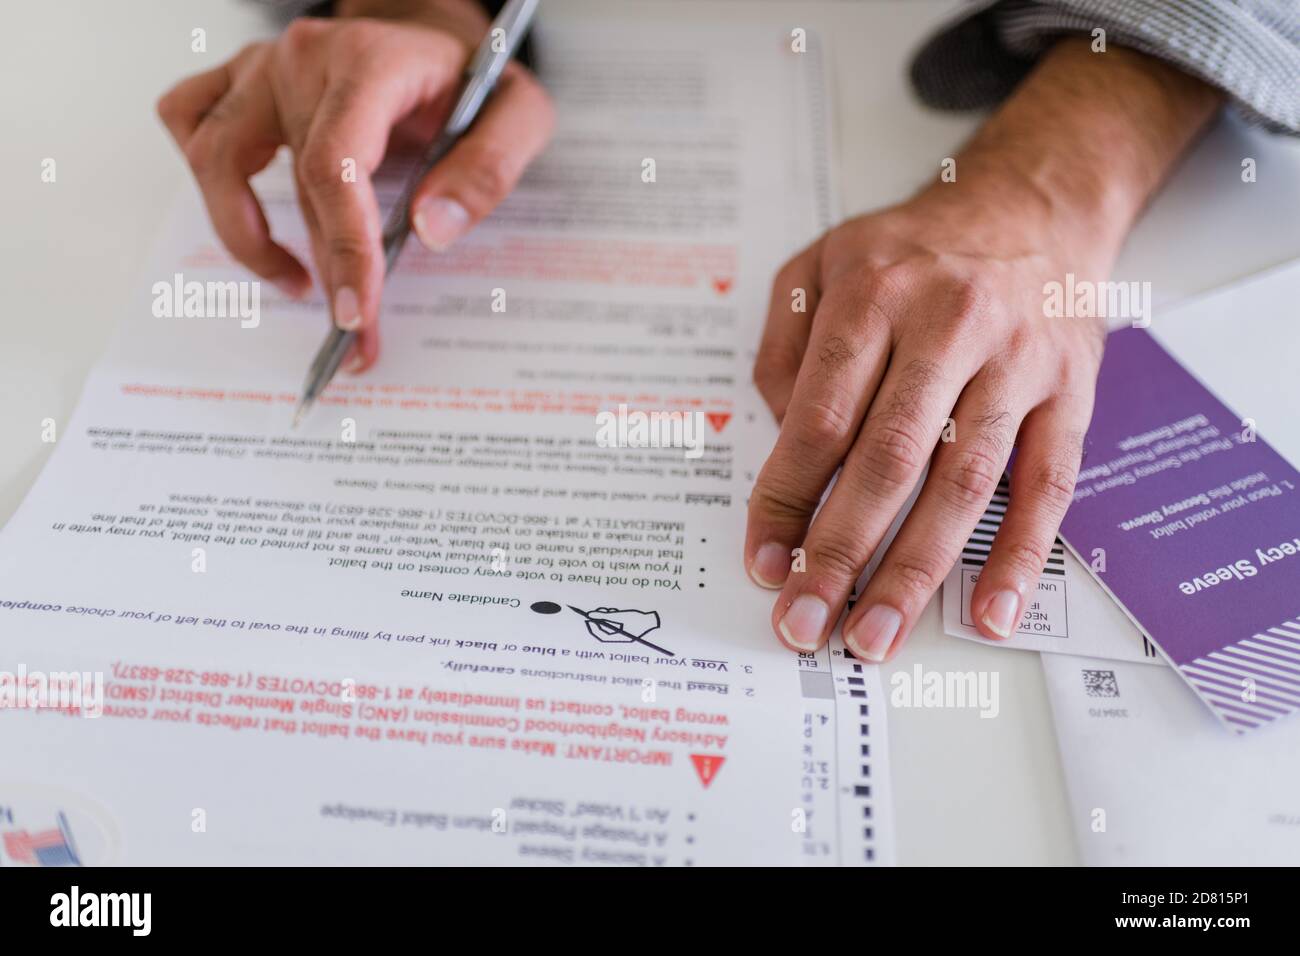 close up of hands completing absentee ballot Stock Photo